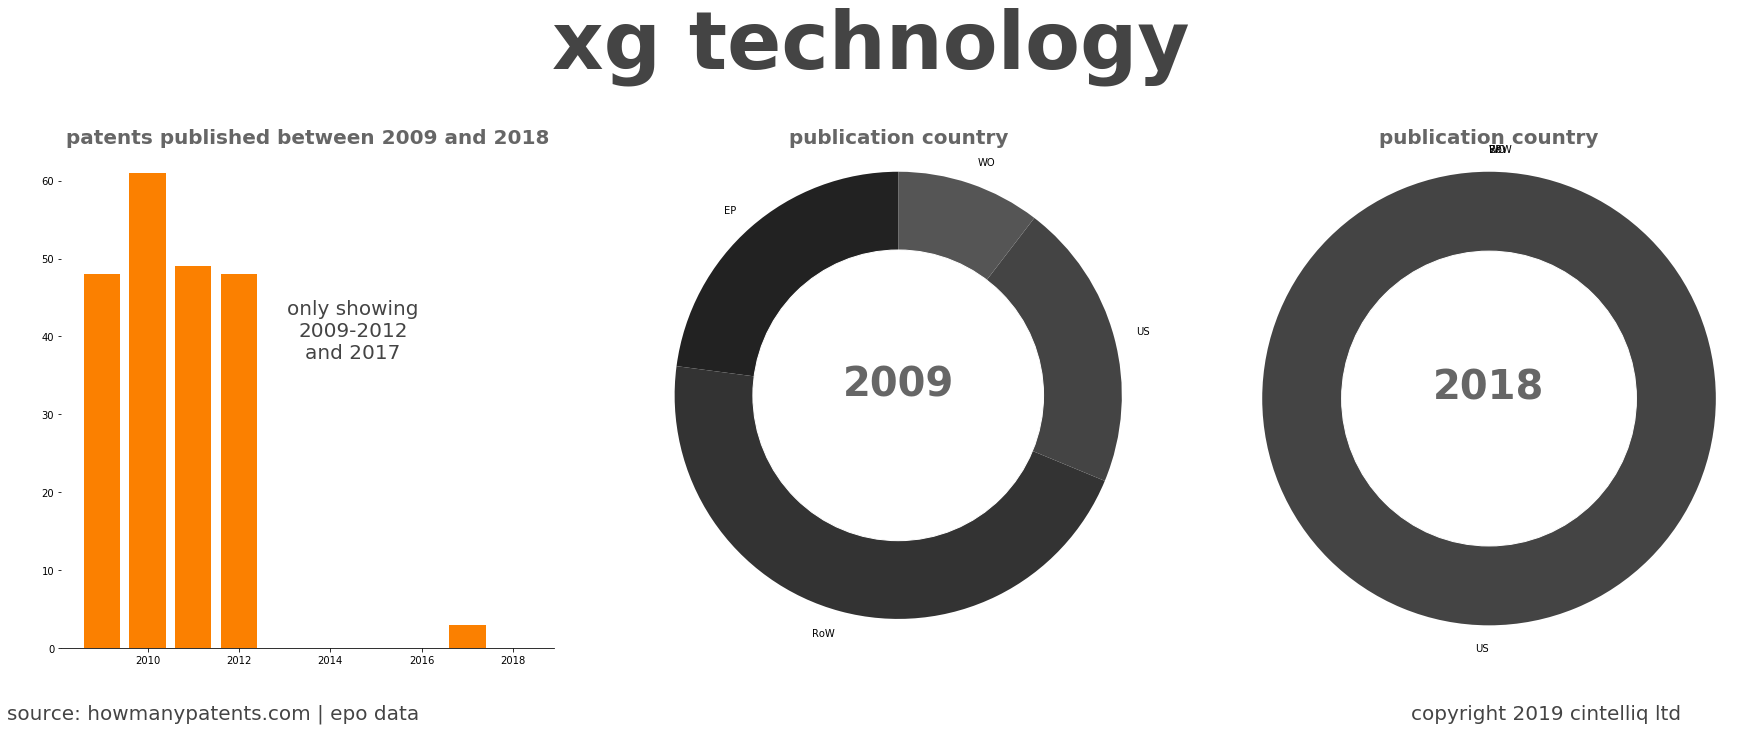 summary of patents for Xg Technology